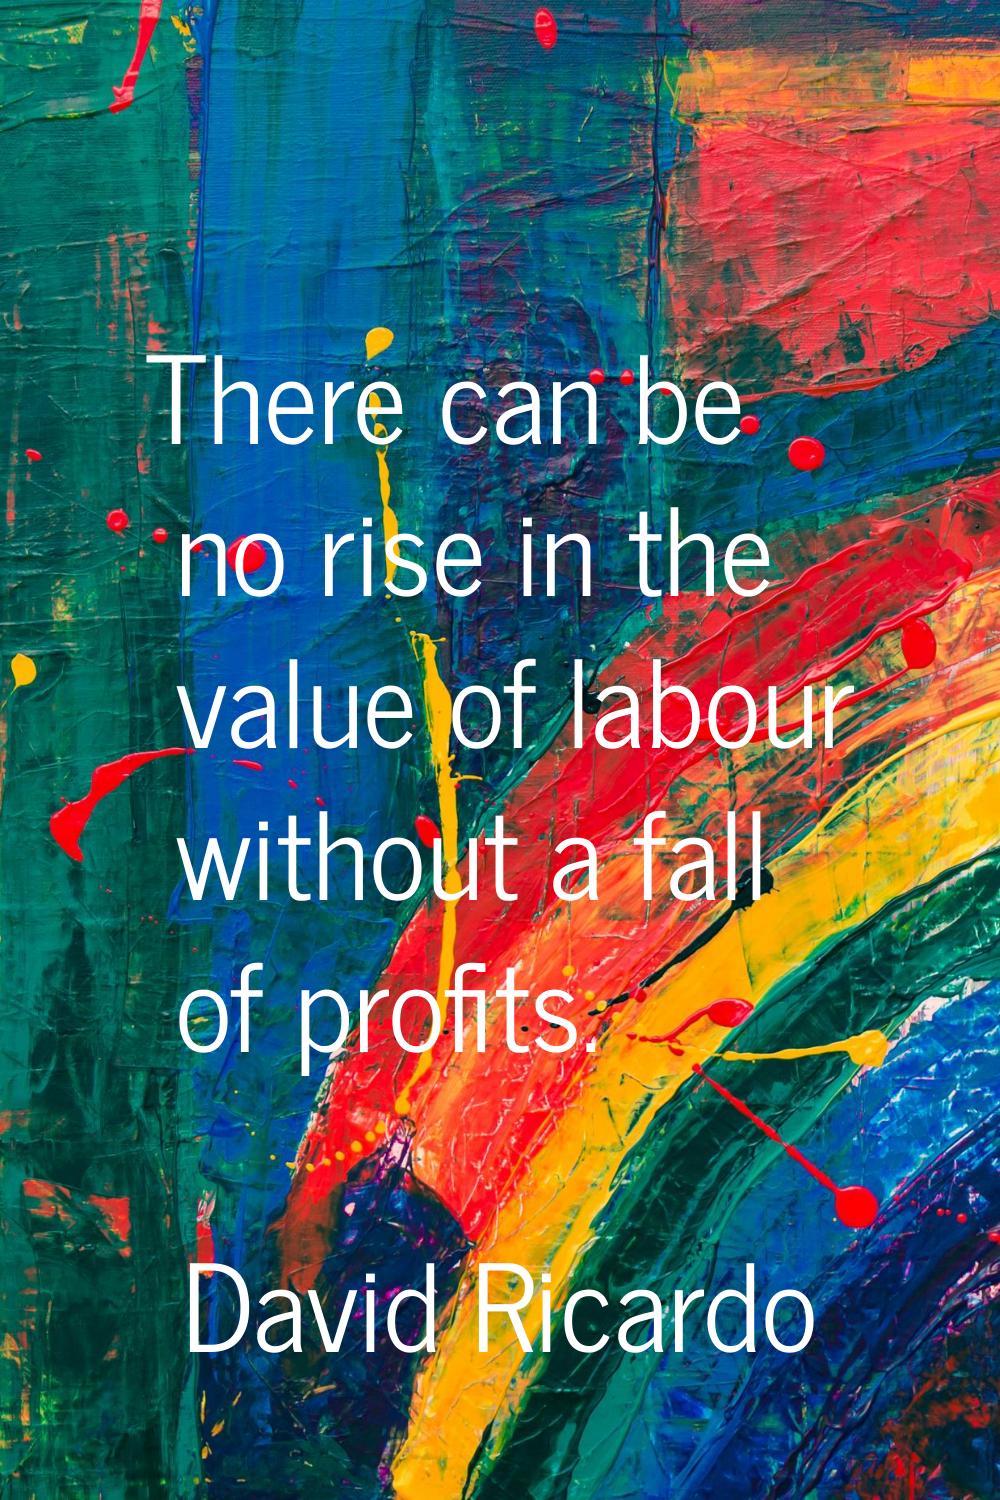 There can be no rise in the value of labour without a fall of profits.